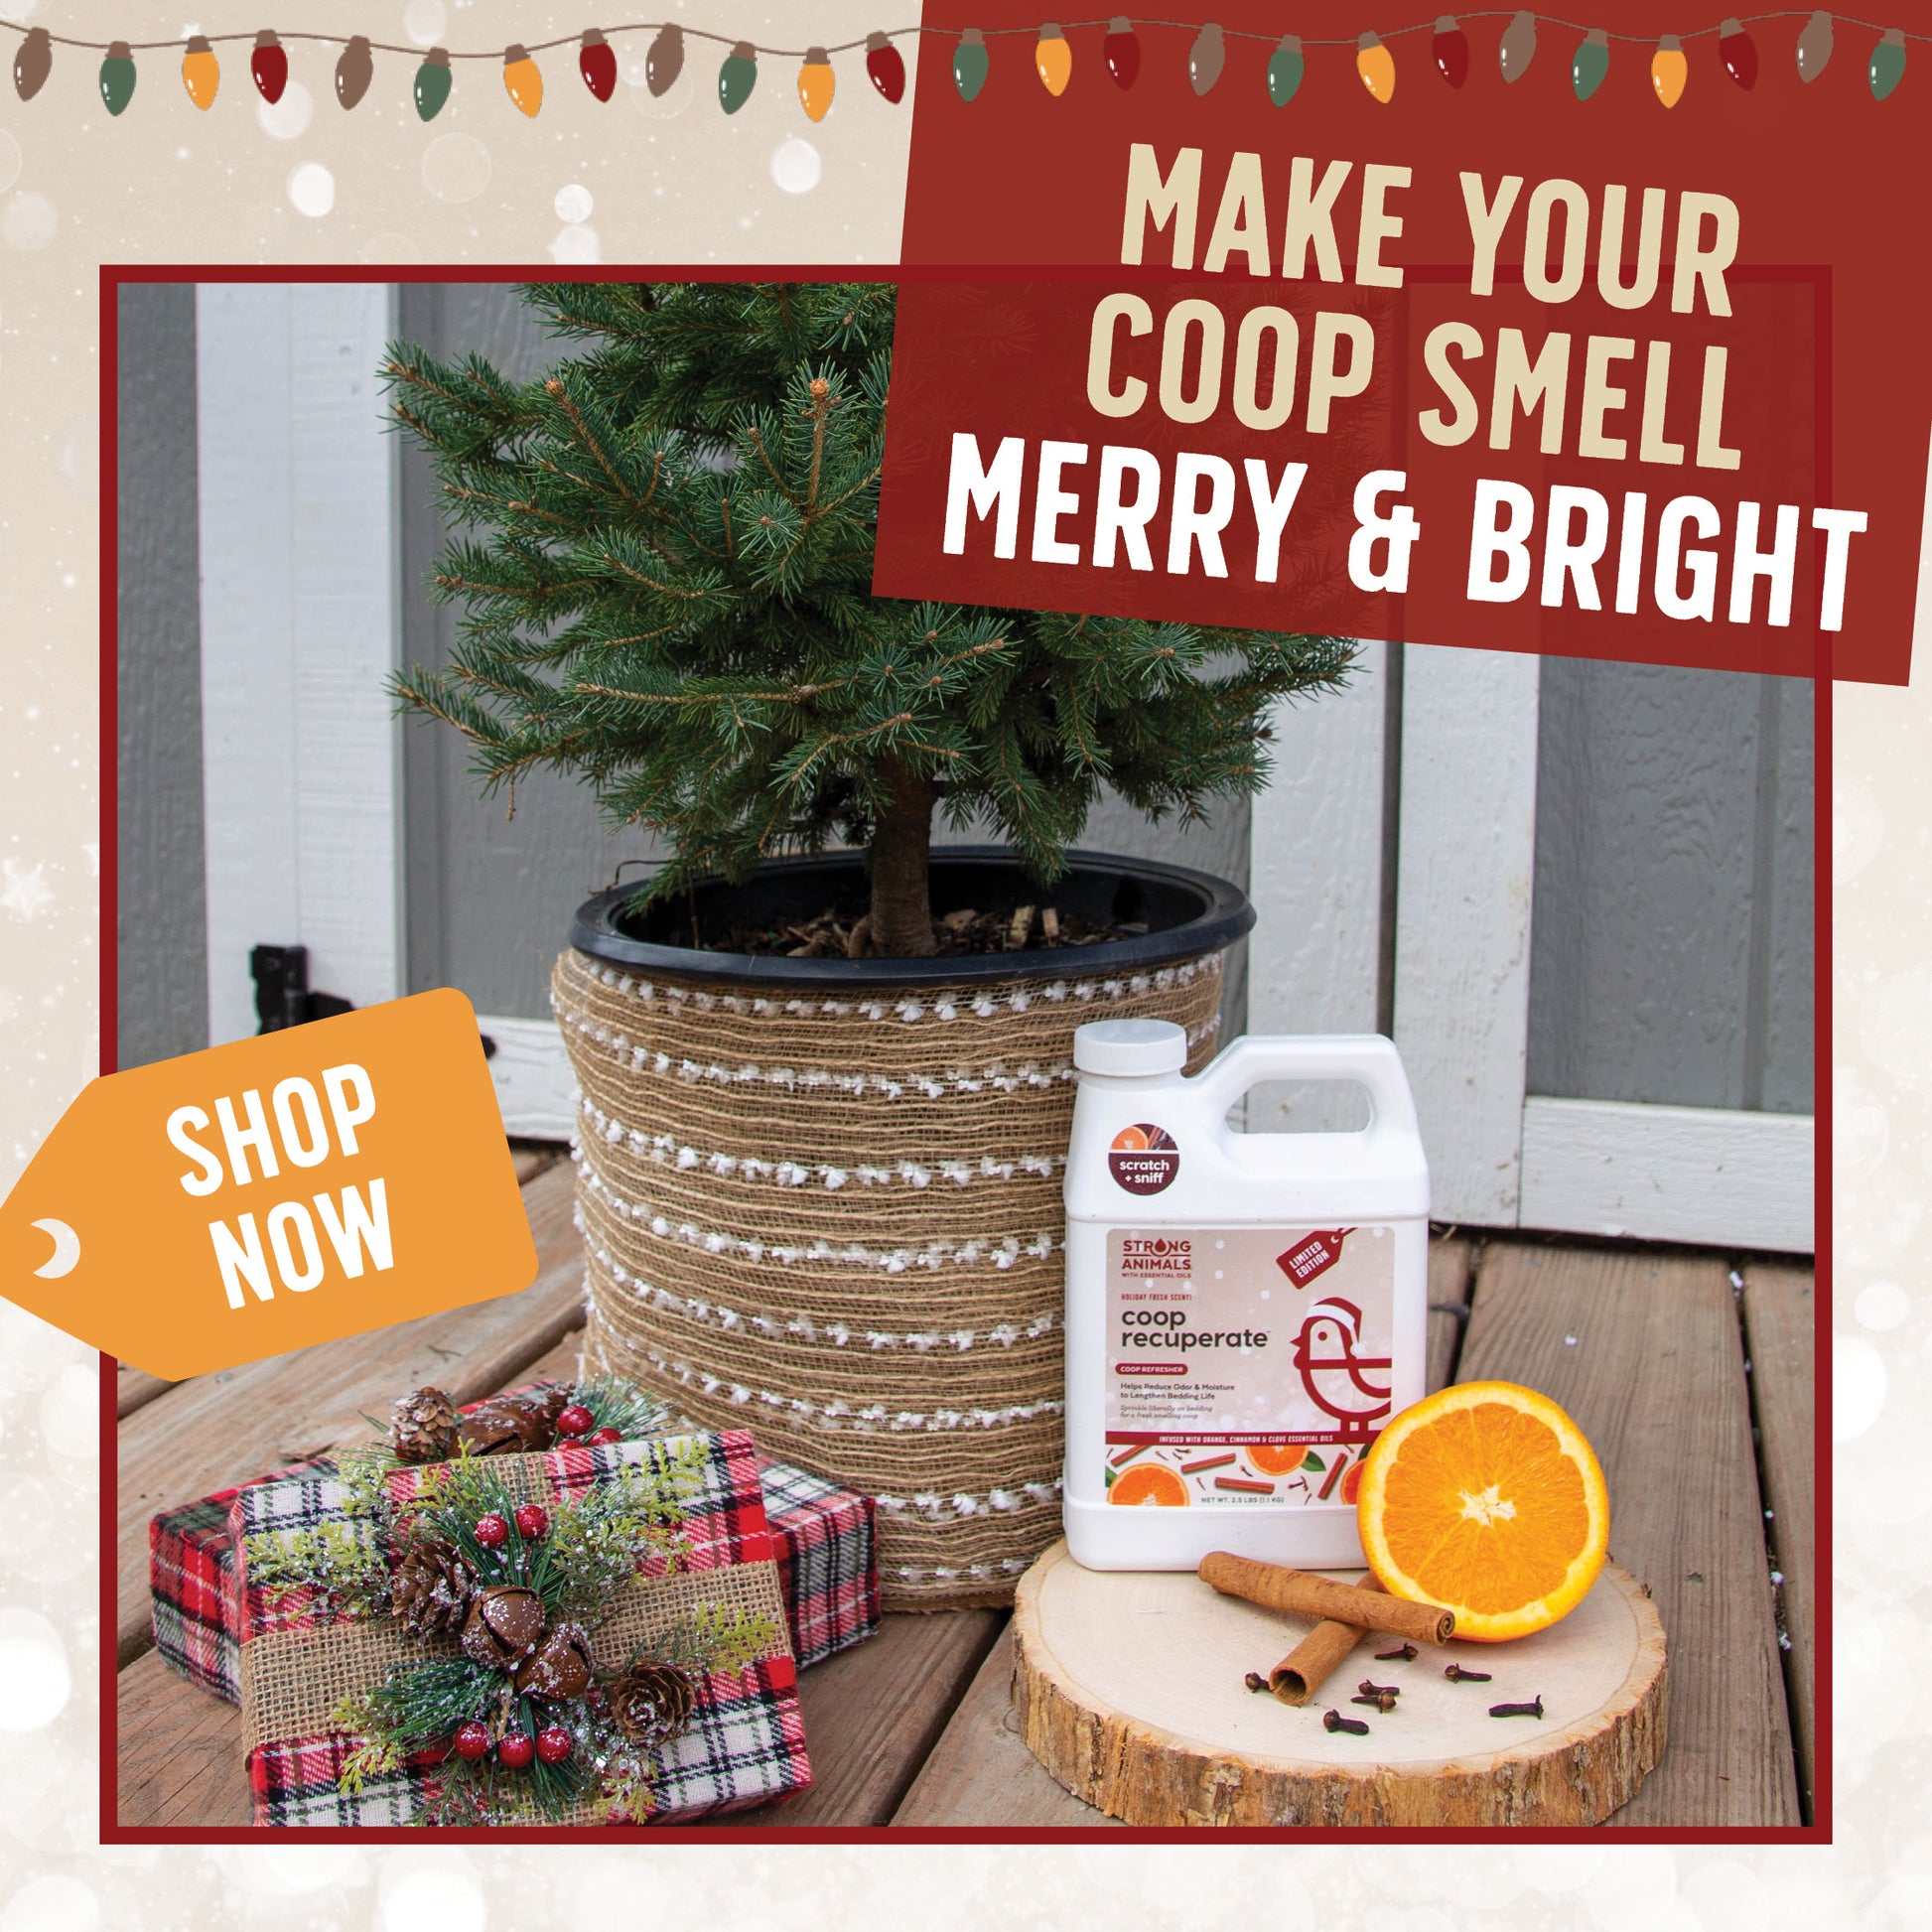 The Holiday Coop Recuperate has an orange, cinnamon, and clove smell that will brighten your coop. 